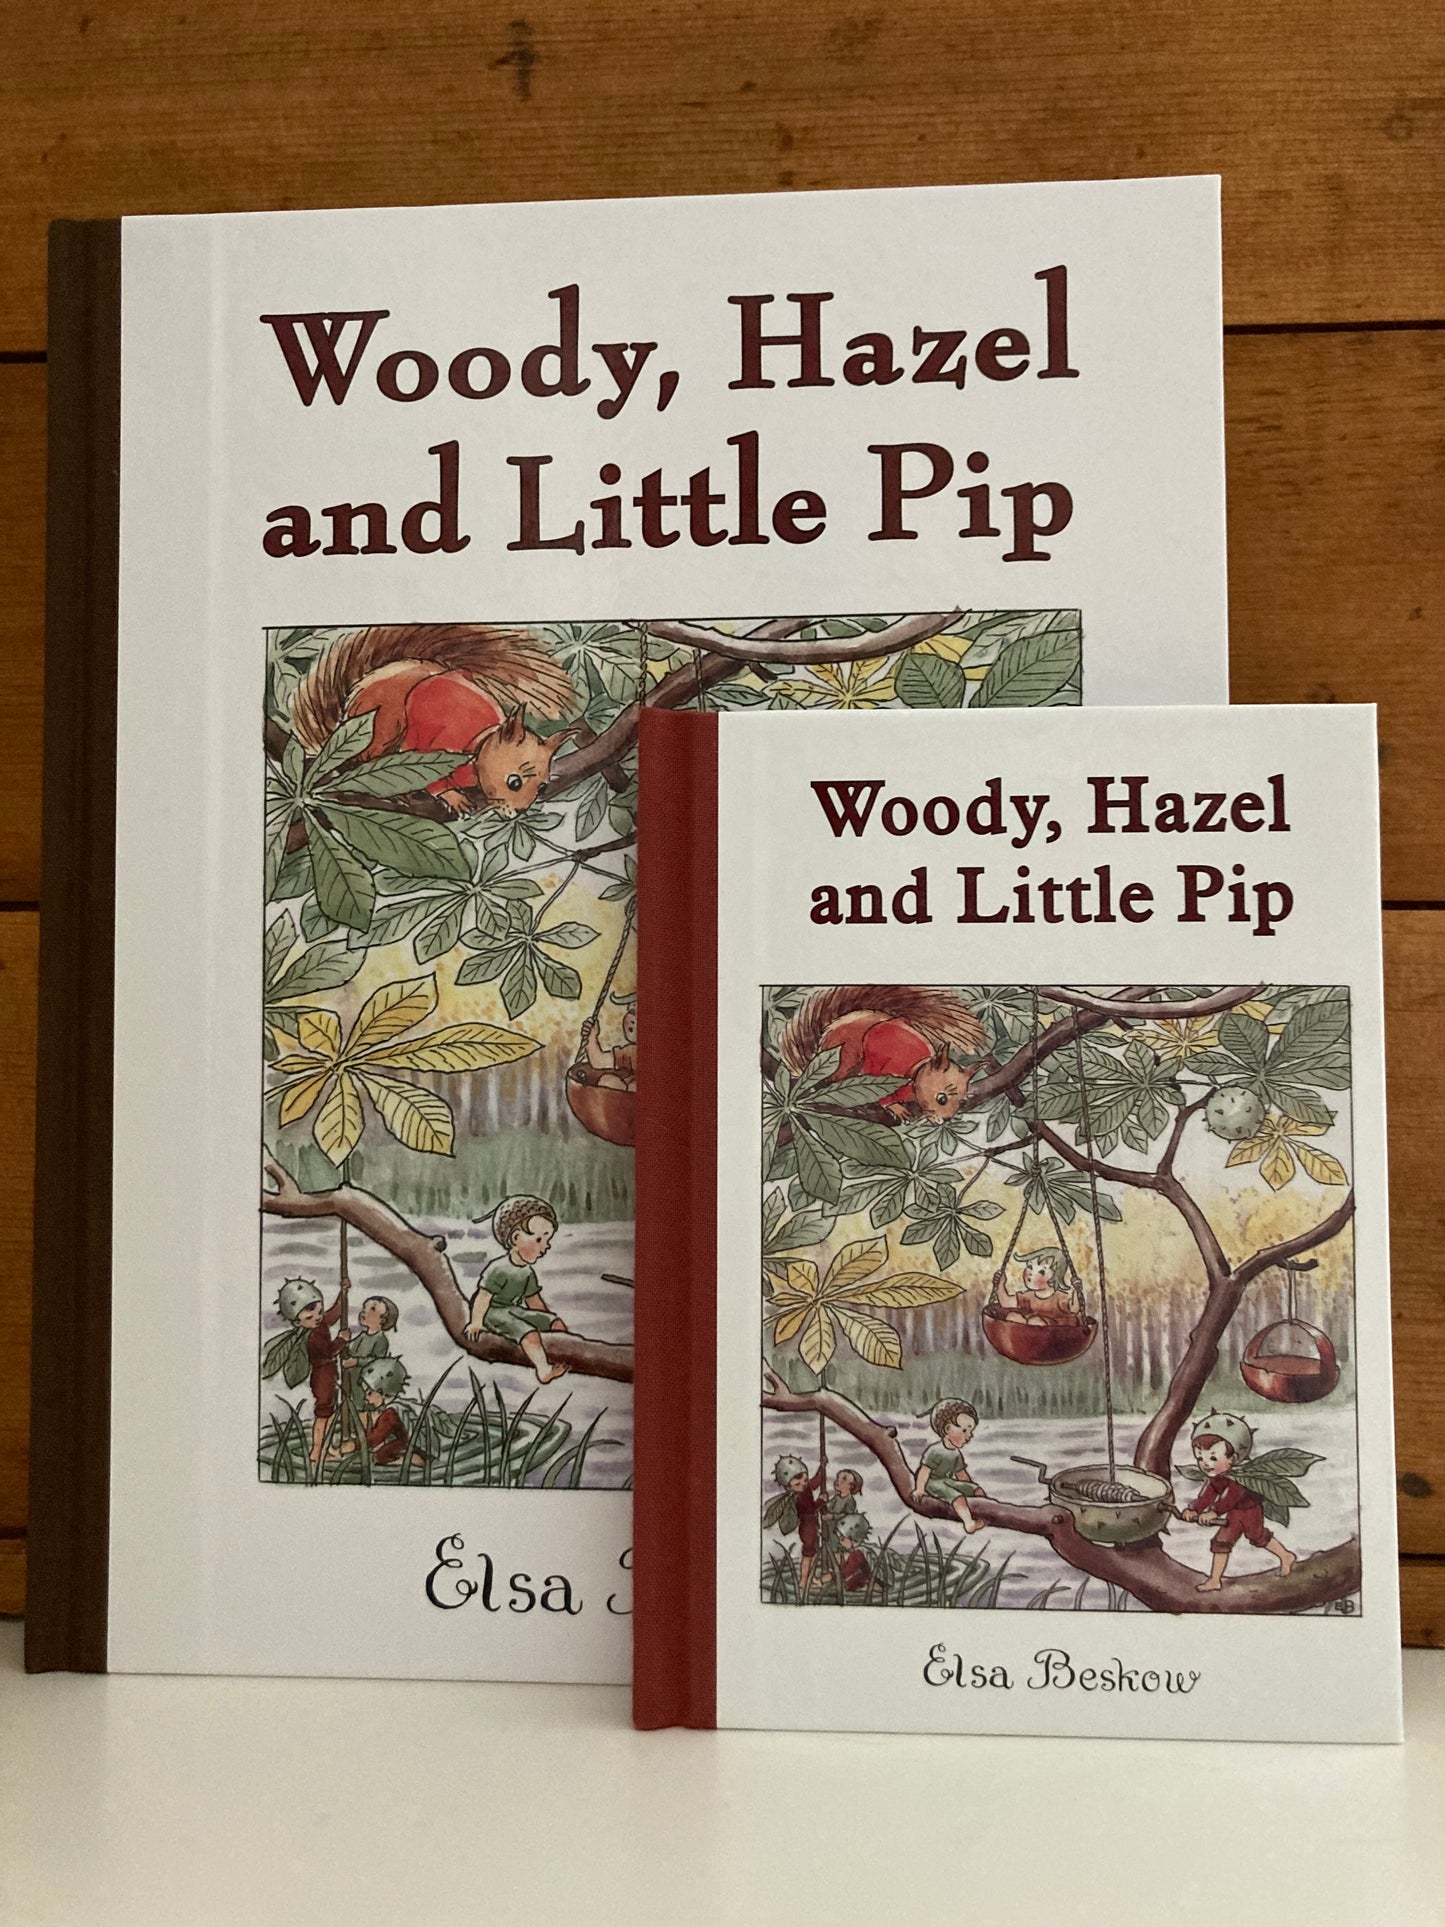 Children's Picture Book - WOODY, HAZEL AND LITTLE PIP